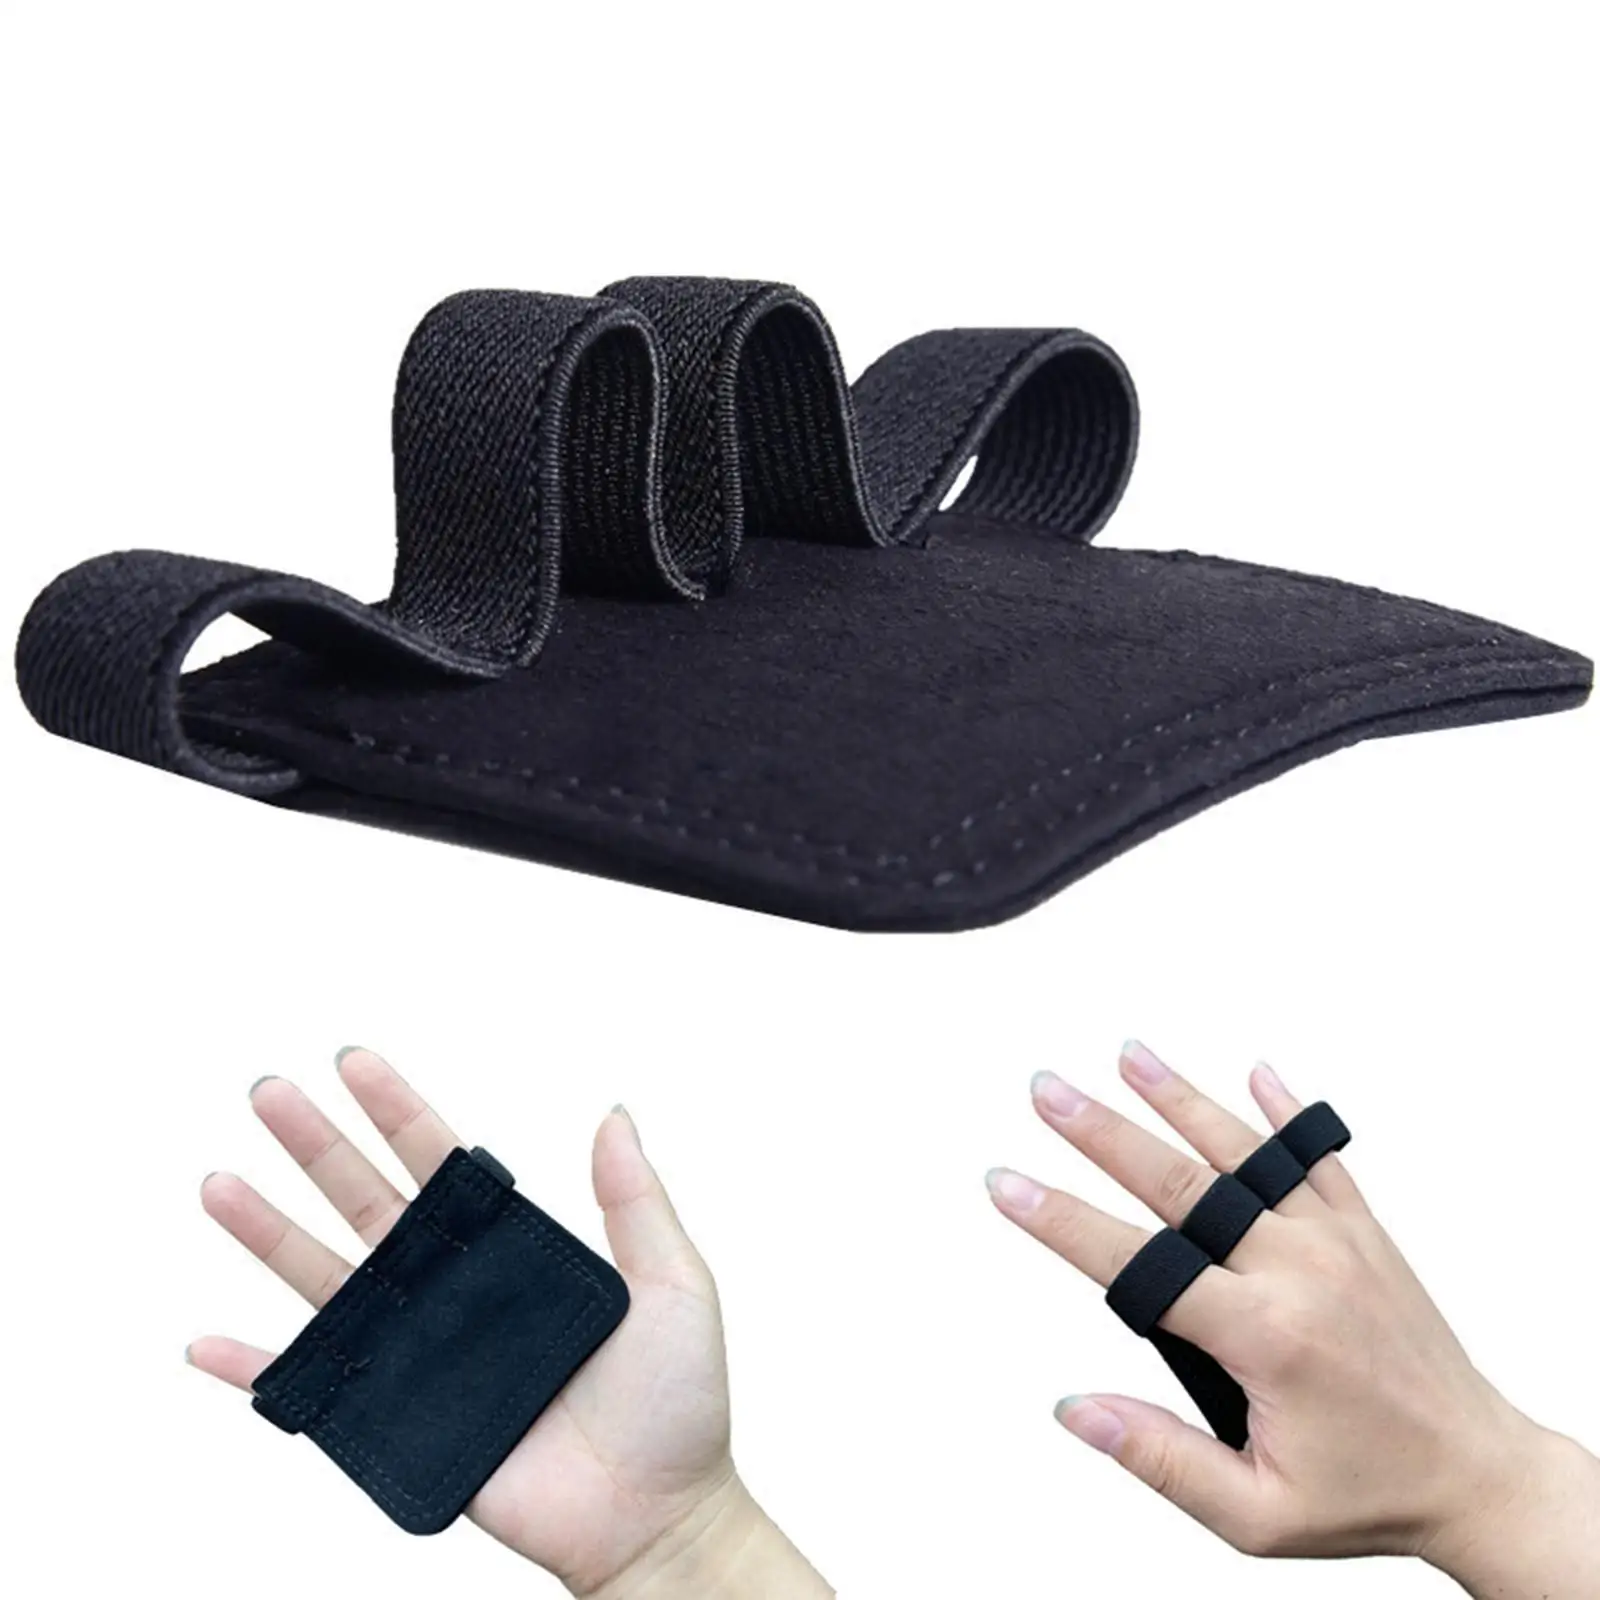  Pad, 4 Hand Guard ,Avoid Calluses ,Workout Gloves for Weightlifting Body Building Exercise Calisthenics Powerlifting